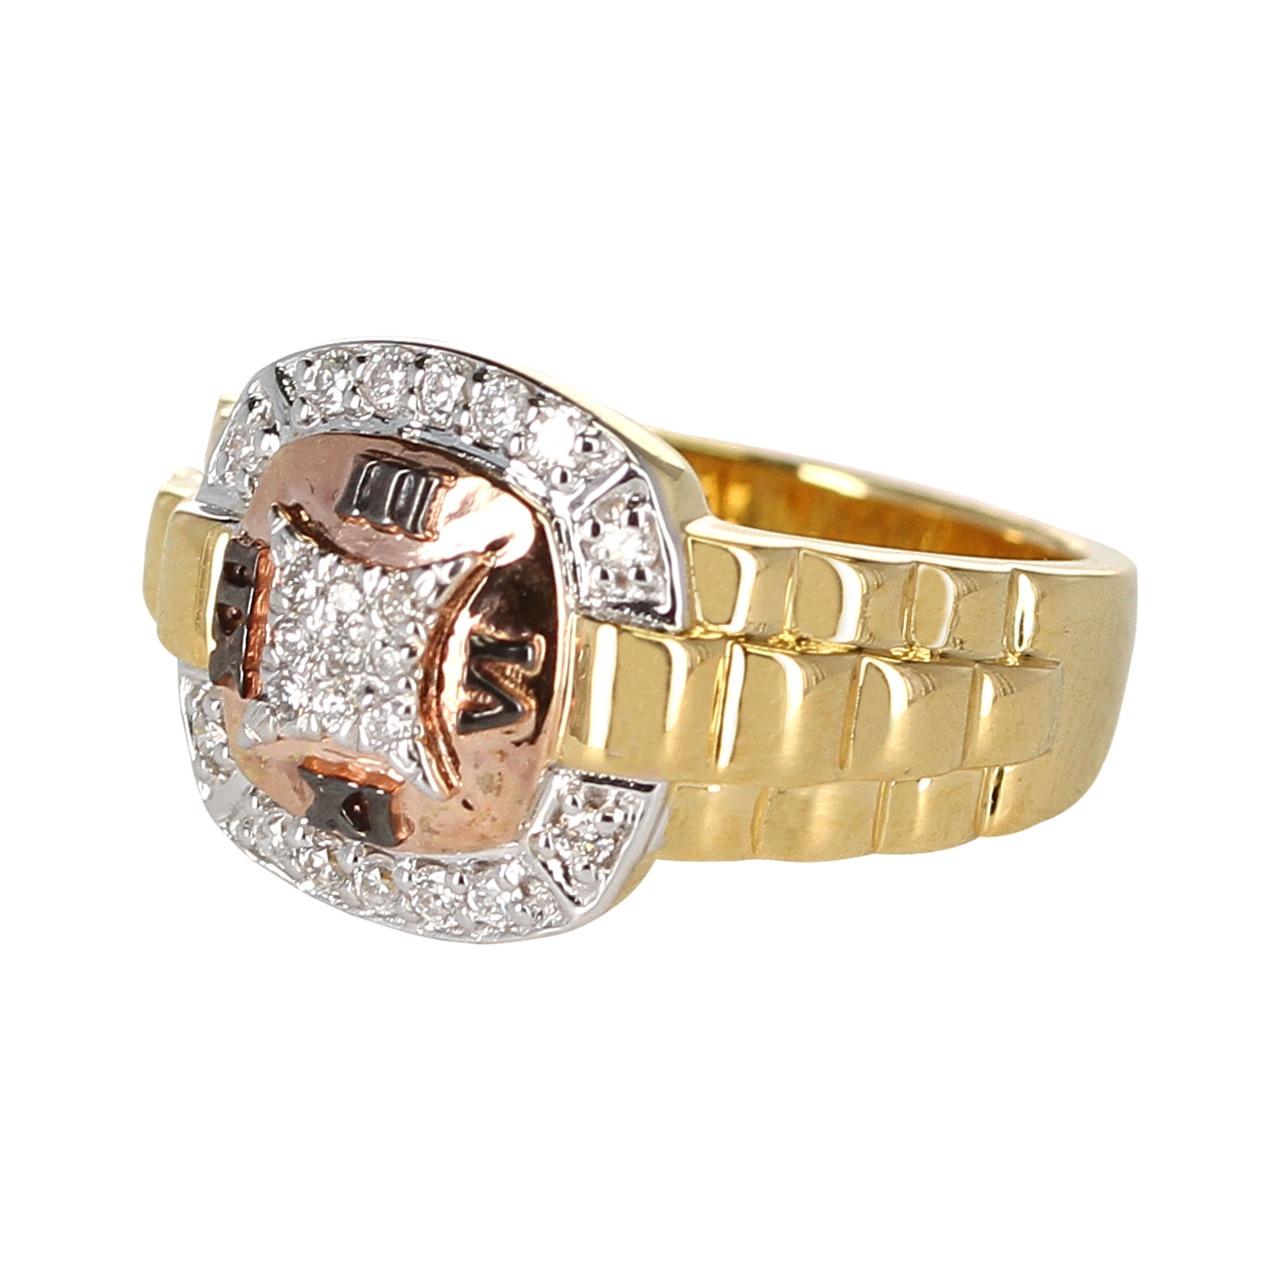 Women's or Men's Diamond and Watch Band Style Ring, 14 Karat Yellow and Rose Gold